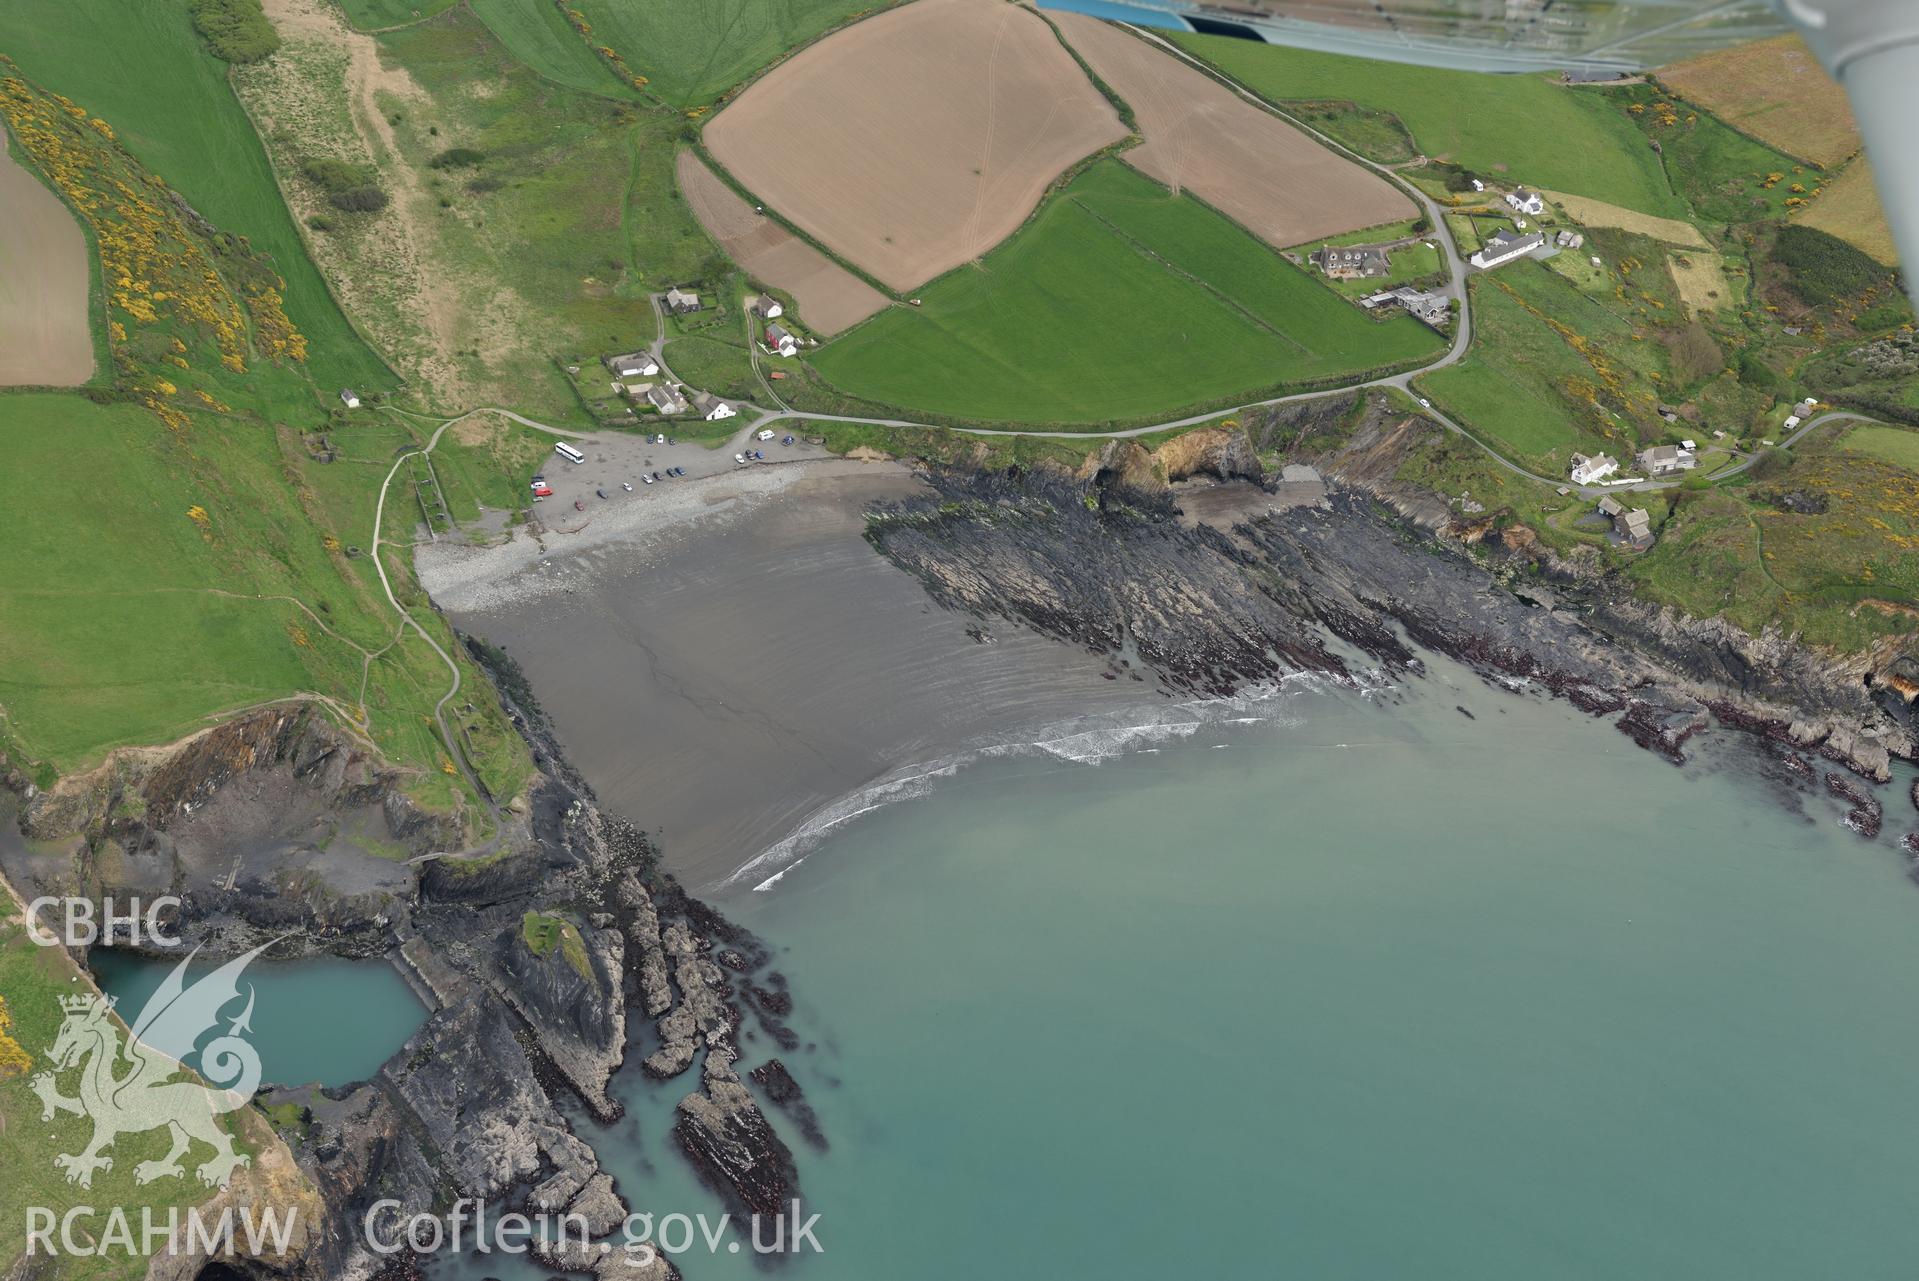 Abereiddy village. Baseline aerial reconnaissance survey for the CHERISH Project. ? Crown: CHERISH PROJECT 2017. Produced with EU funds through the Ireland Wales Co-operation Programme 2014-2020. All material made freely available through the Open Government Licence.